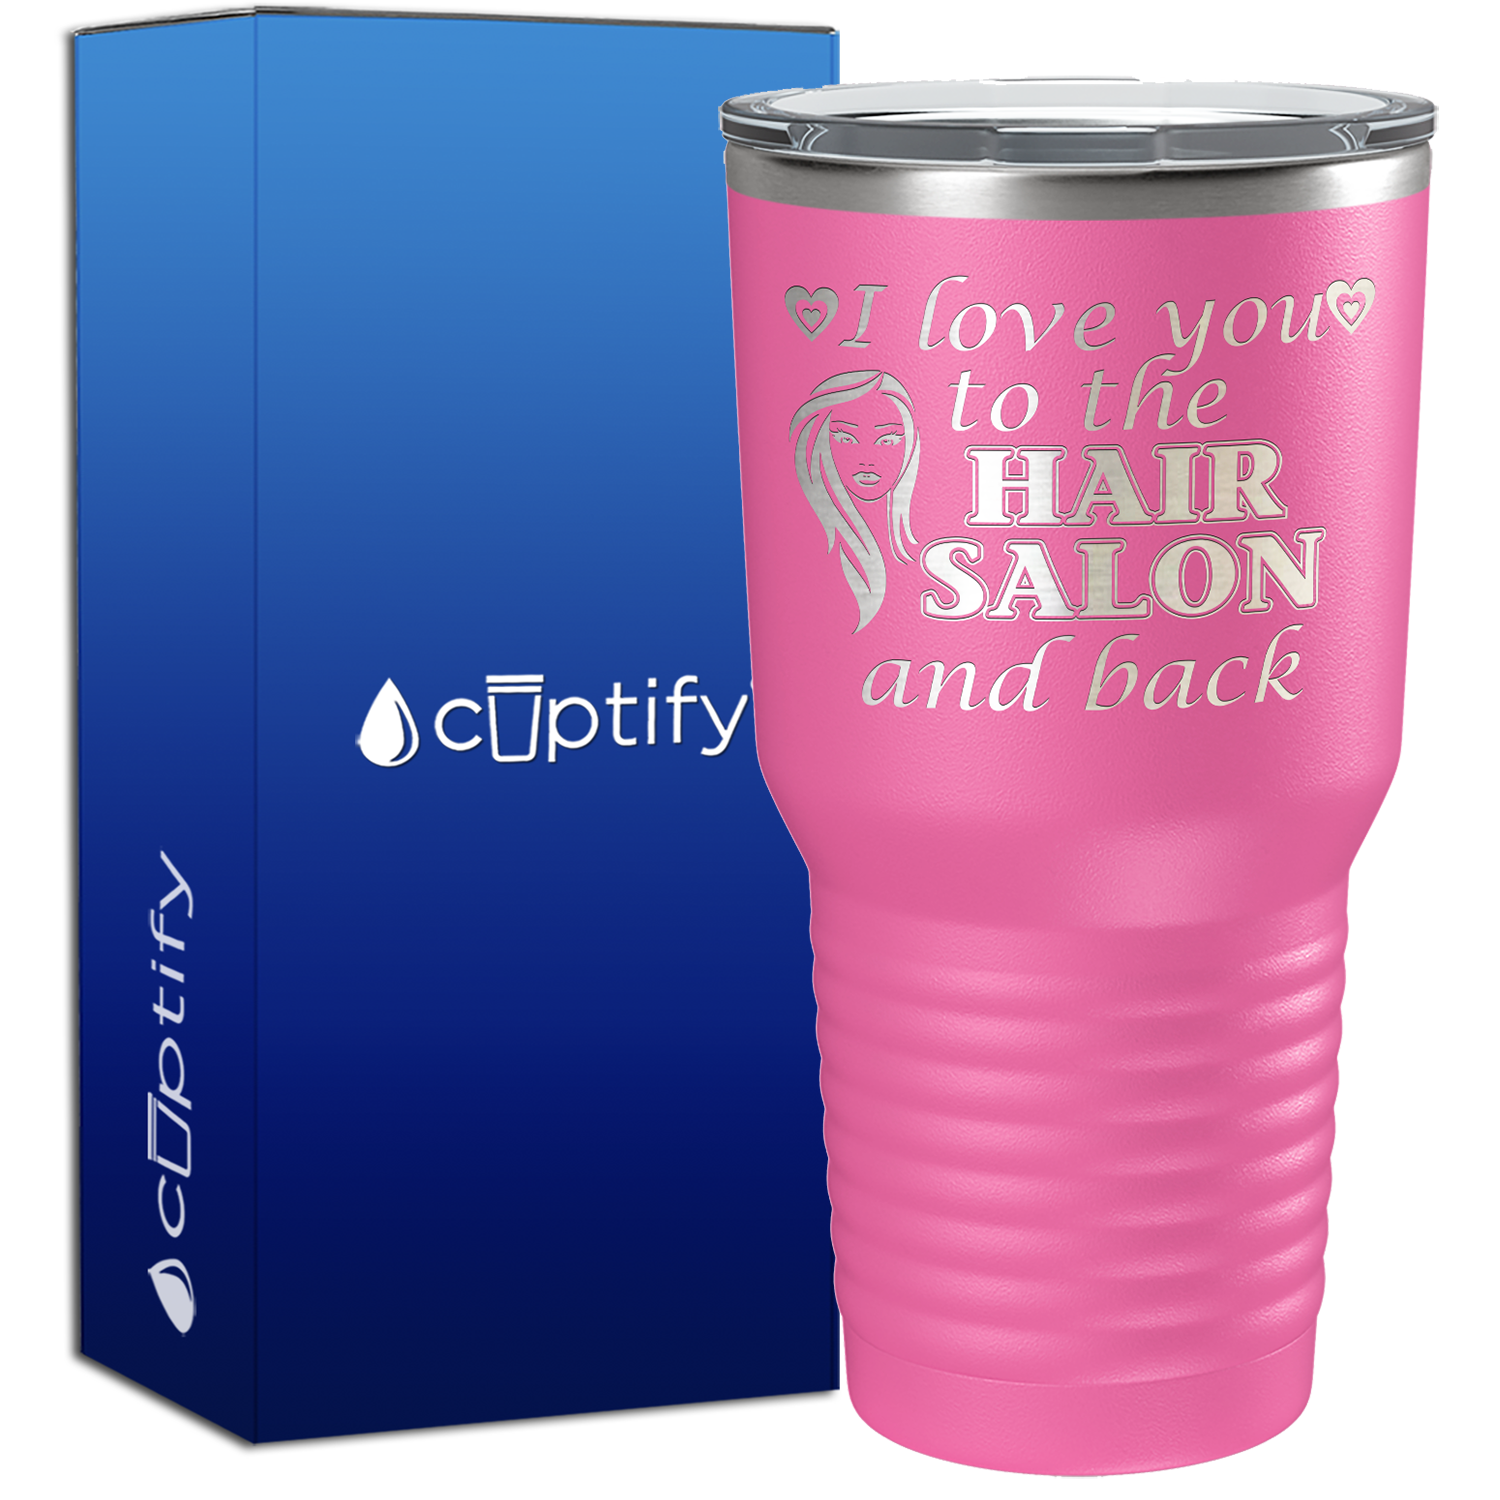 I Love you to the Hair Salon and Back 30oz Hair Stylists Tumbler